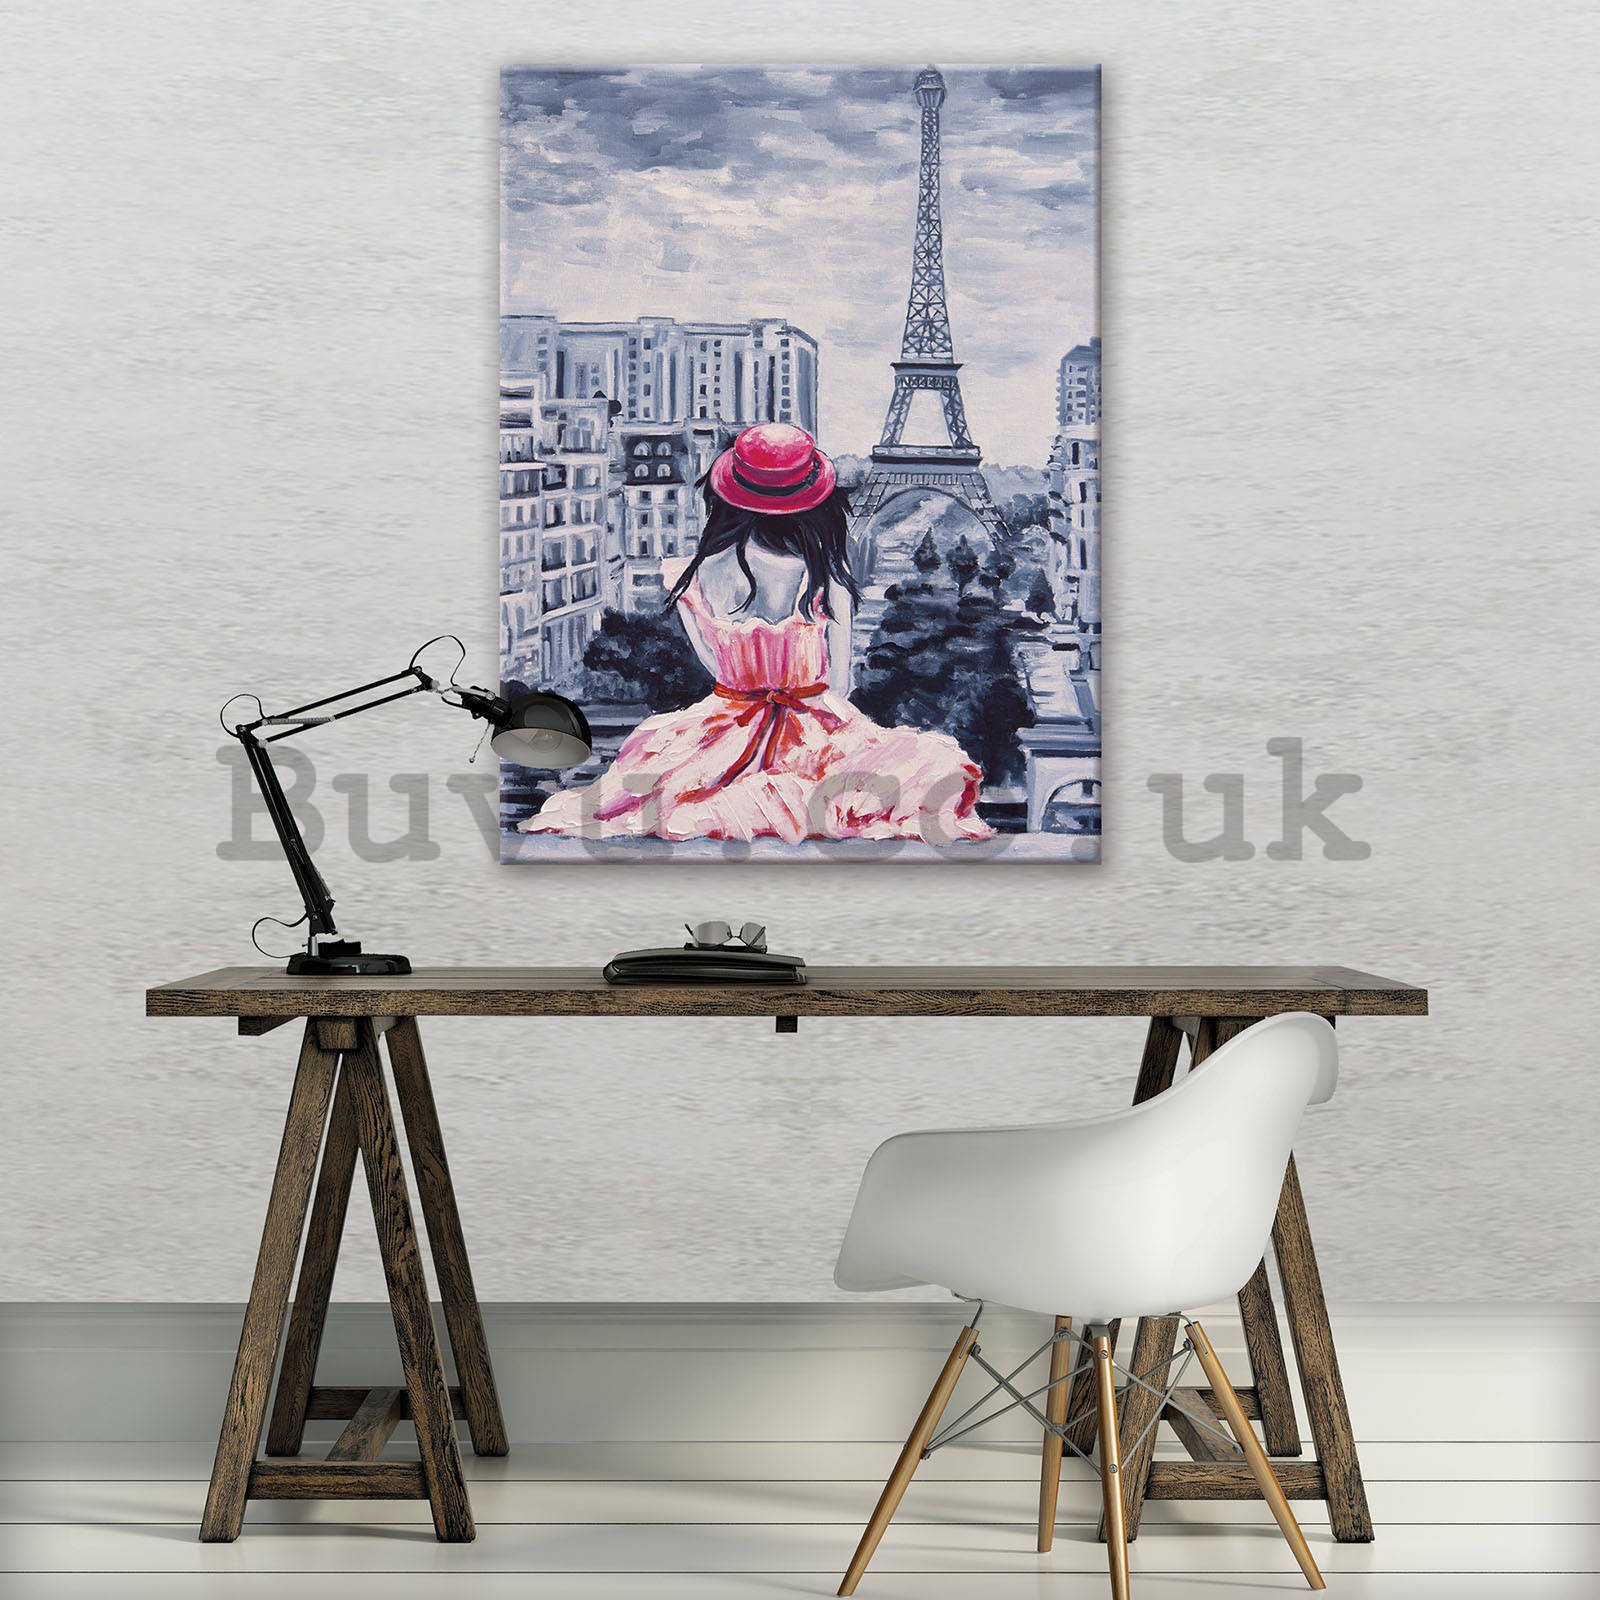 Painting on canvas: Girl in Paris - 60x80 cm